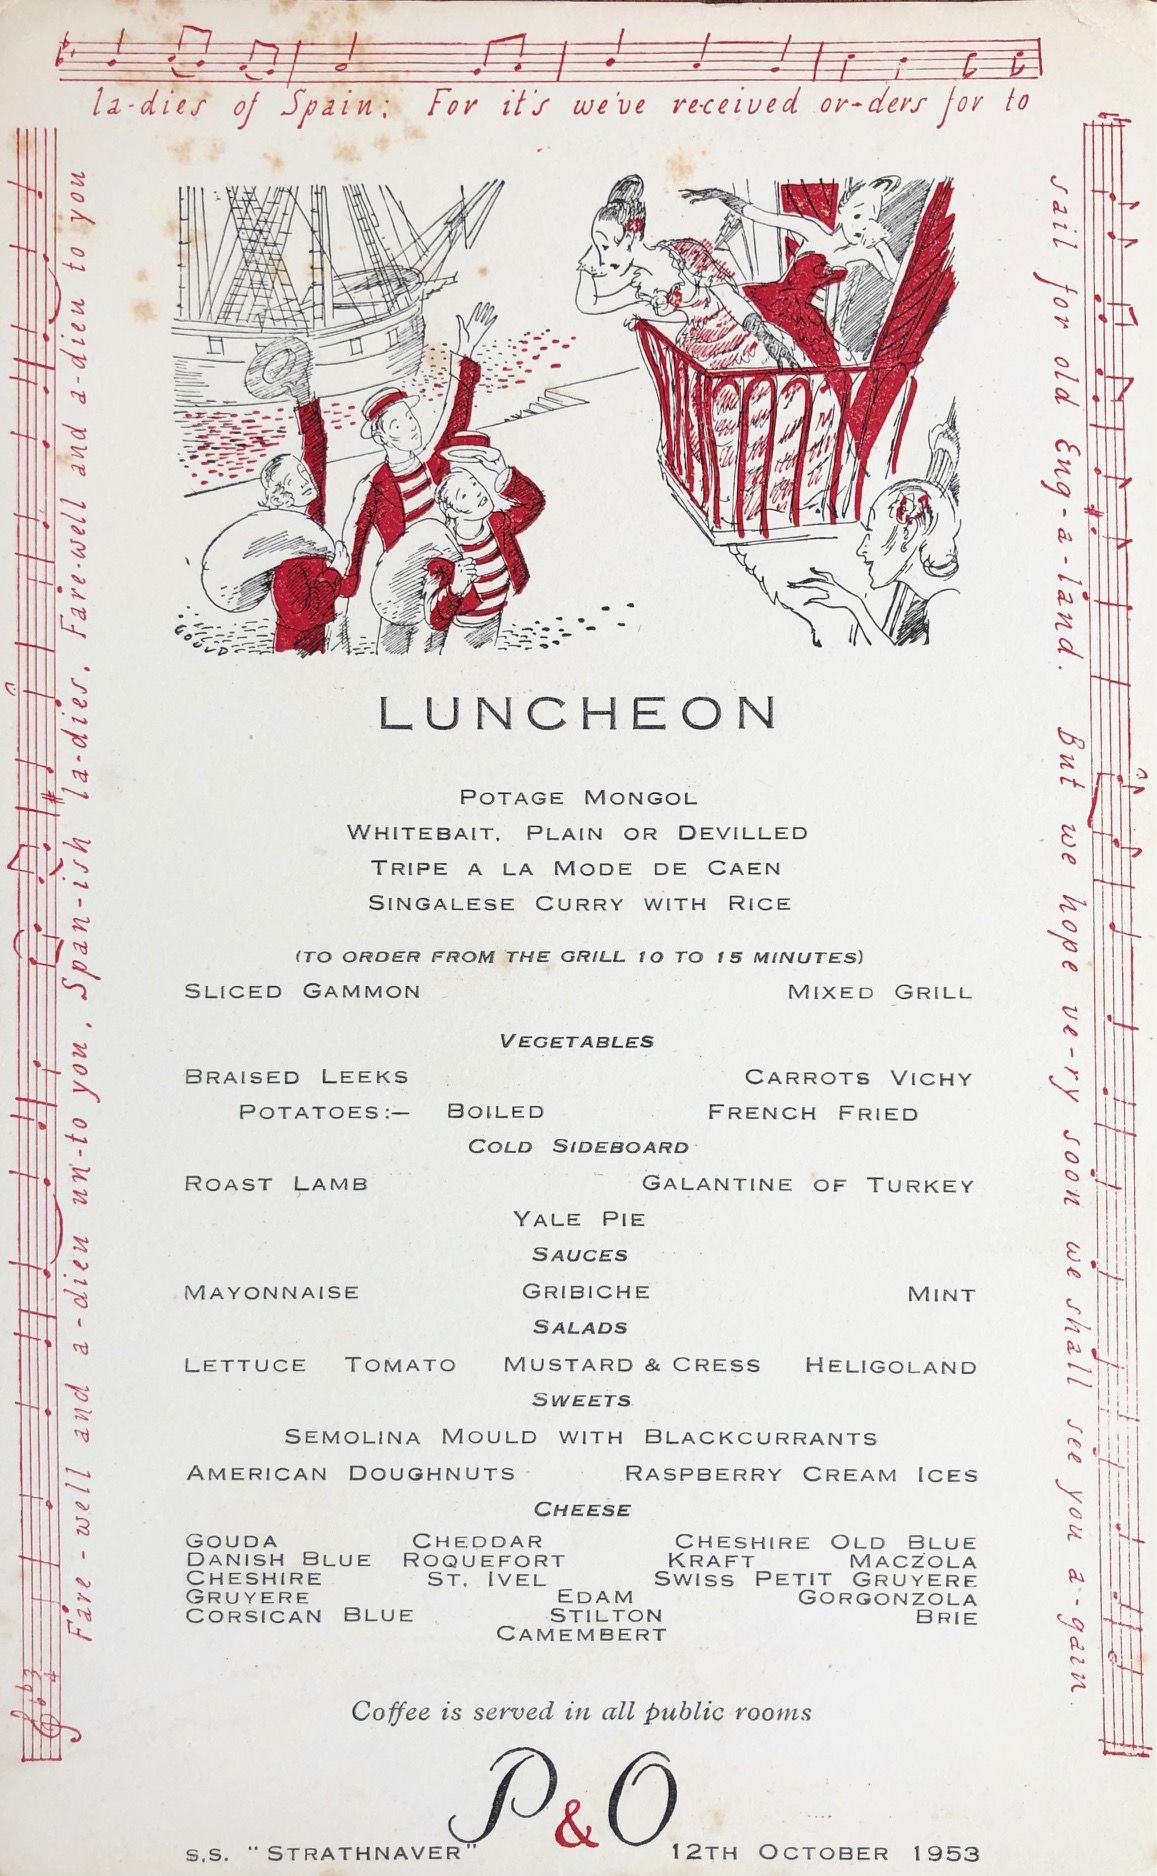 *NEW* P & O Lines. S.S. "Strathnaver" Luncheon Menu - Farewell and Adieu